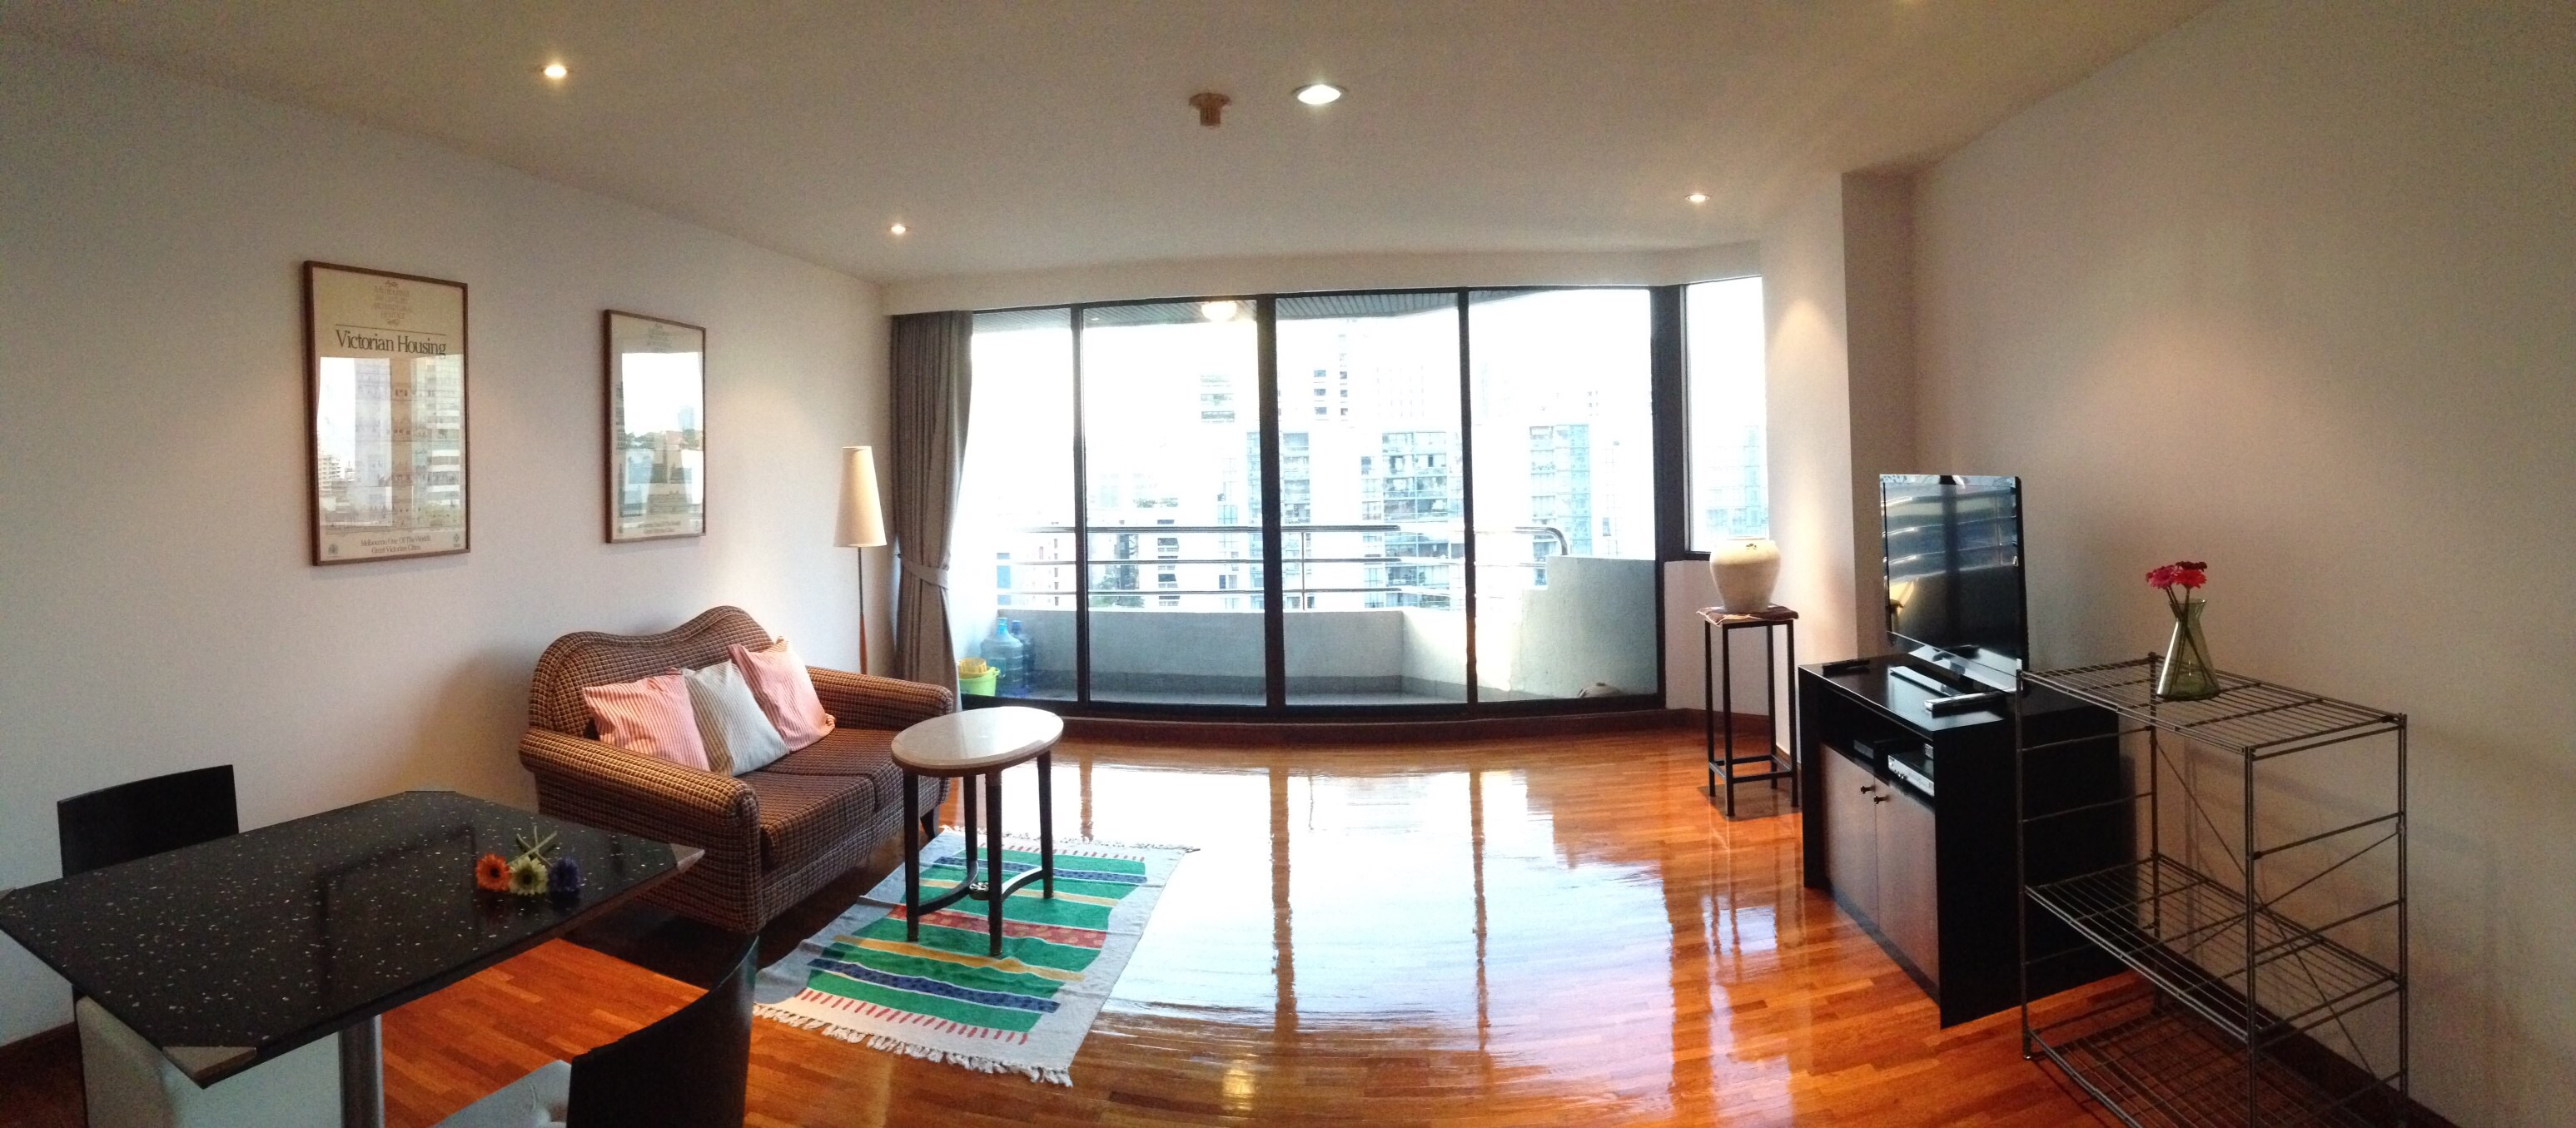 Live in Asoke <br />
near Foodland, Park<br />
with space <br />